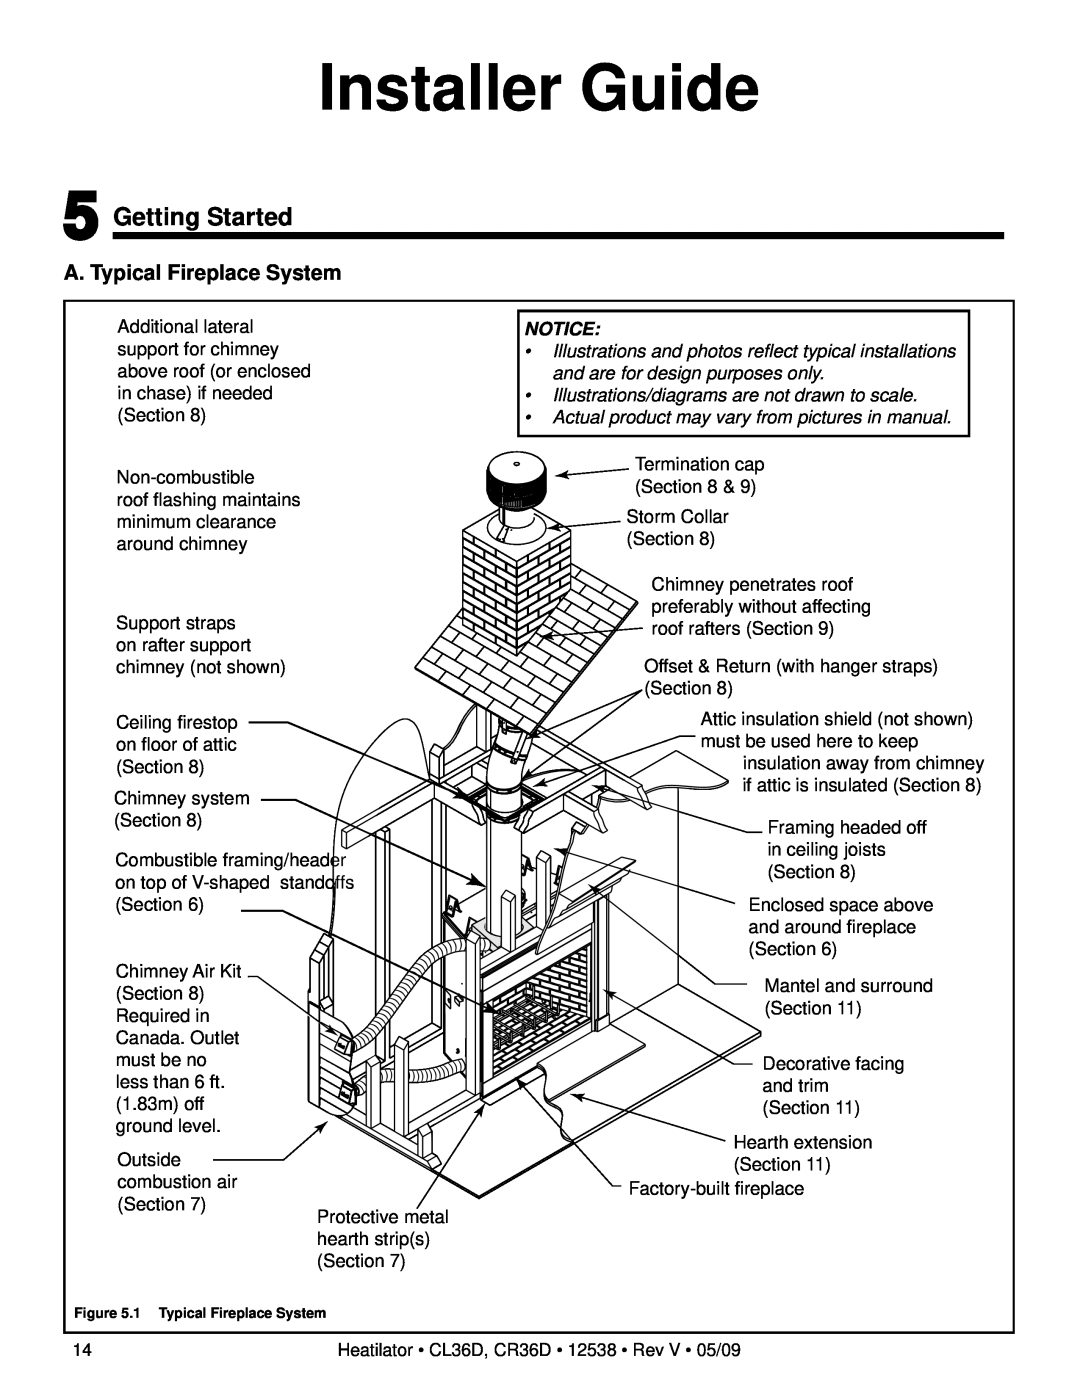 Heatiator CR36D, CL36D owner manual Installer Guide, Getting Started, A. Typical Fireplace System 